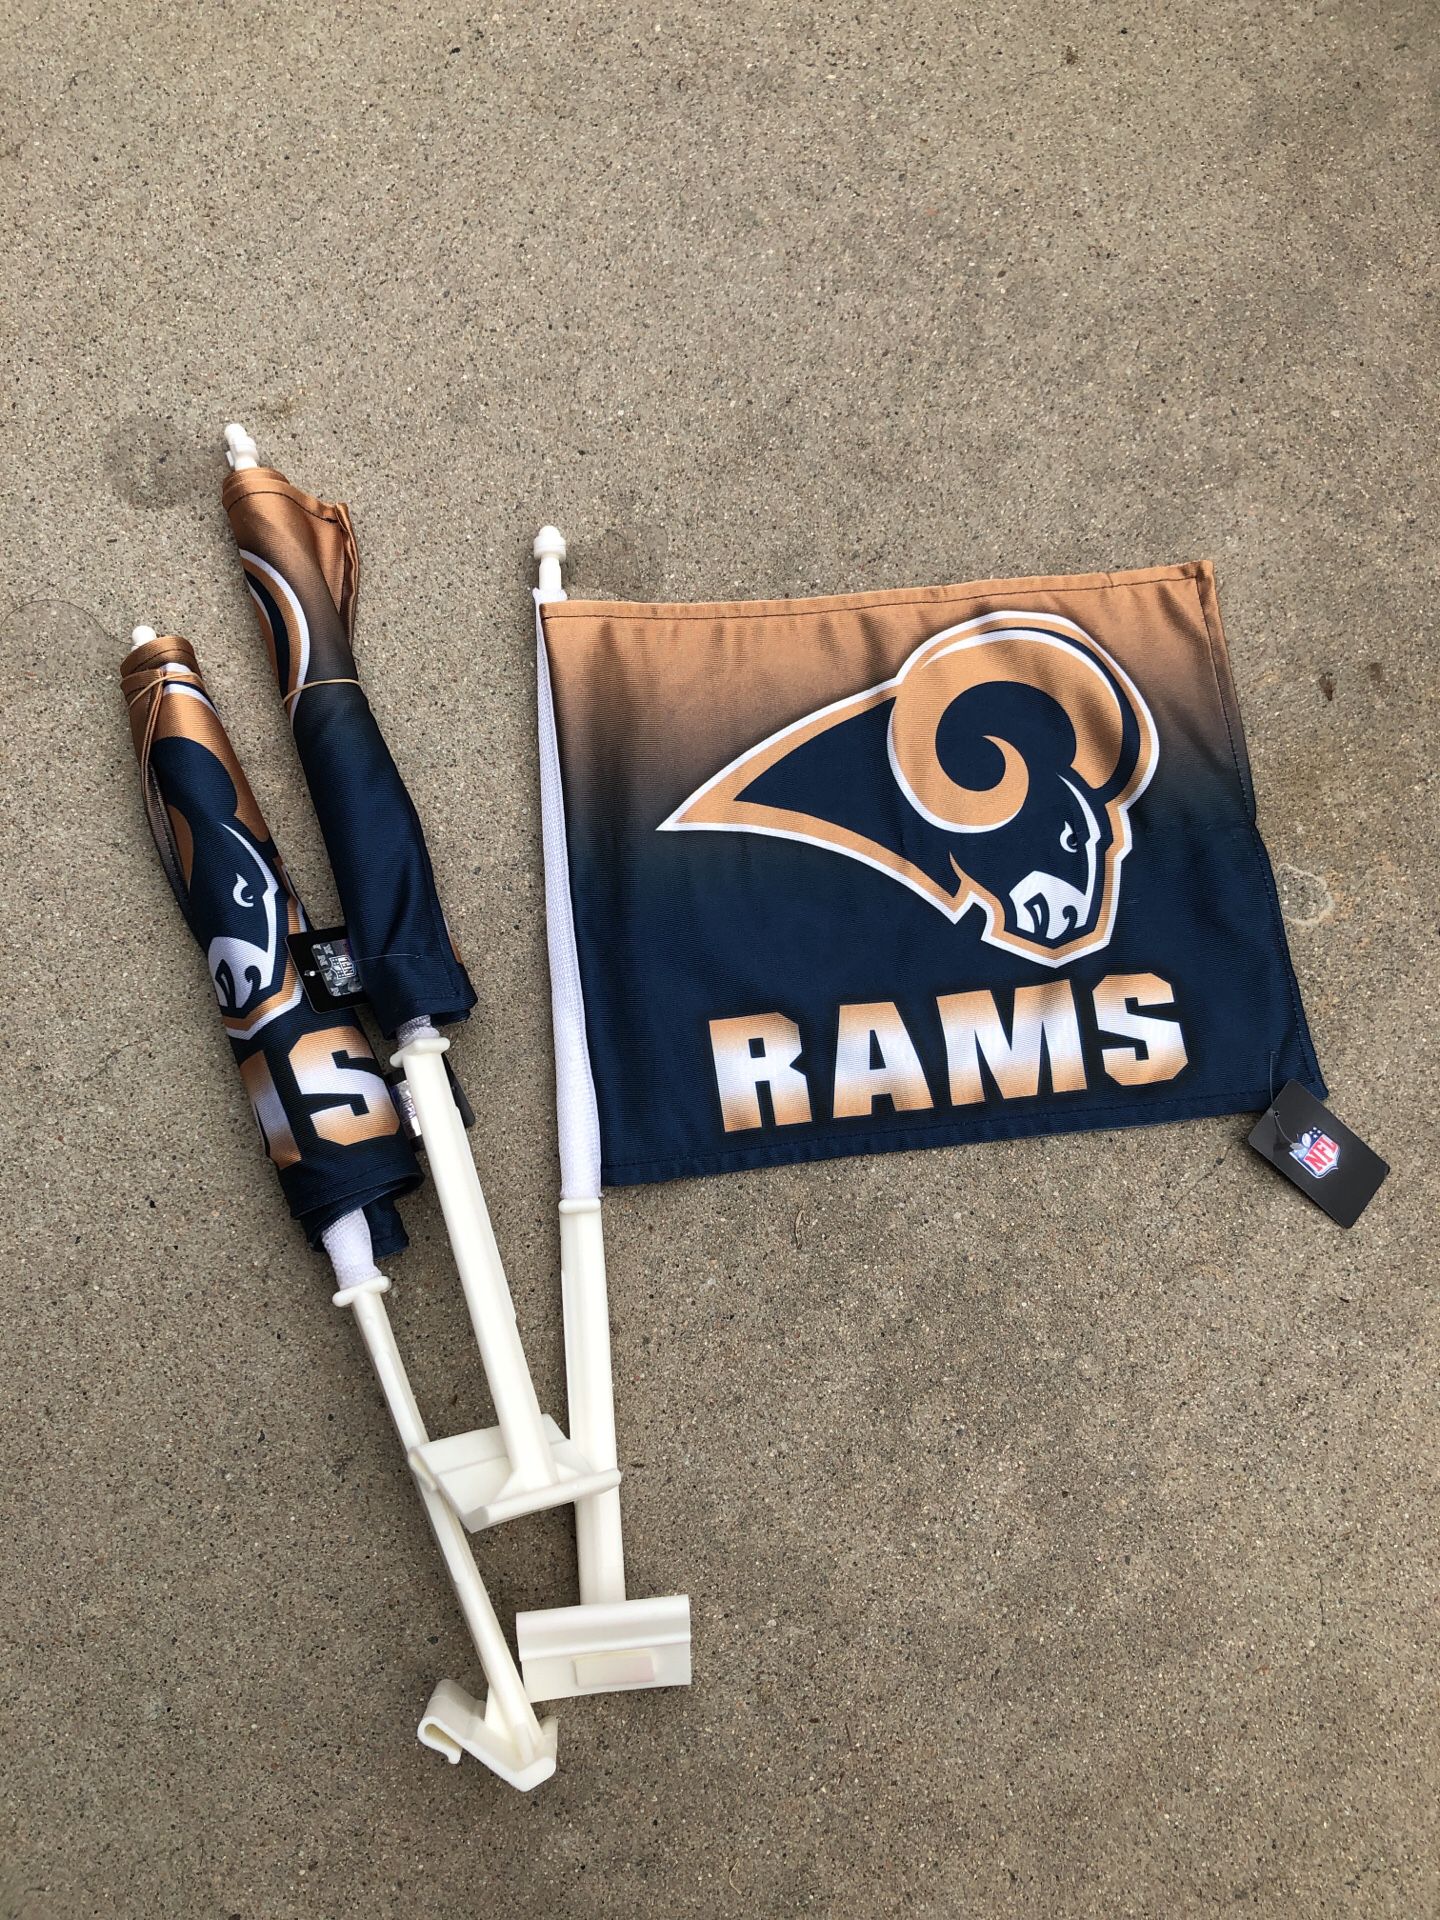 Los Angeles RAMS CAR FLAGS - $10 ONE LEFT